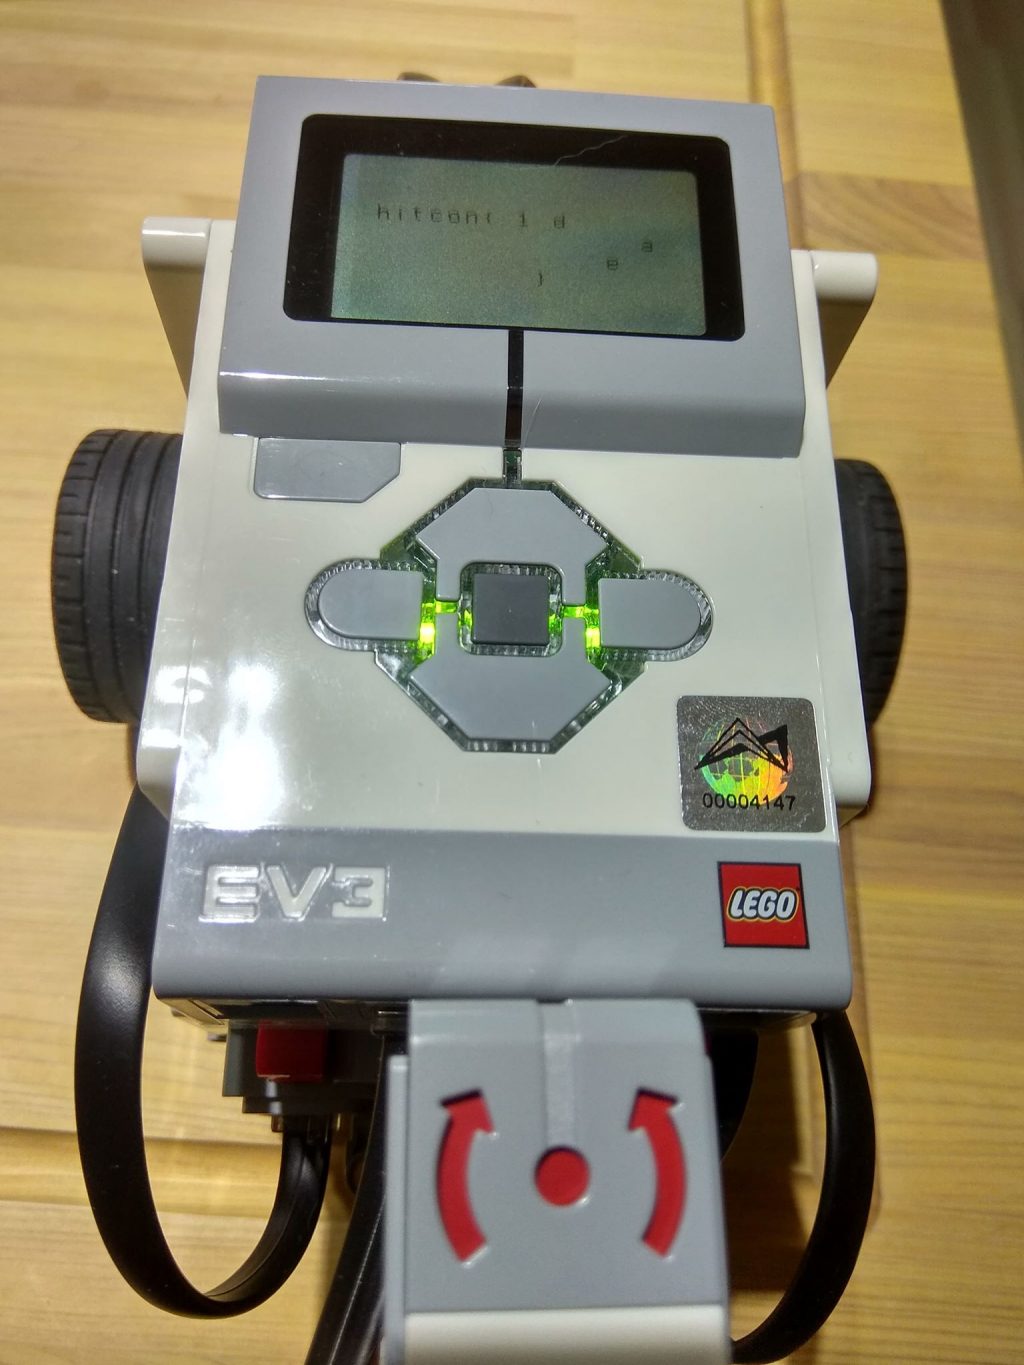 Photo of a LEGO Mindstorms EV3, displaying a screen of a challenge flag with most of the characters missing